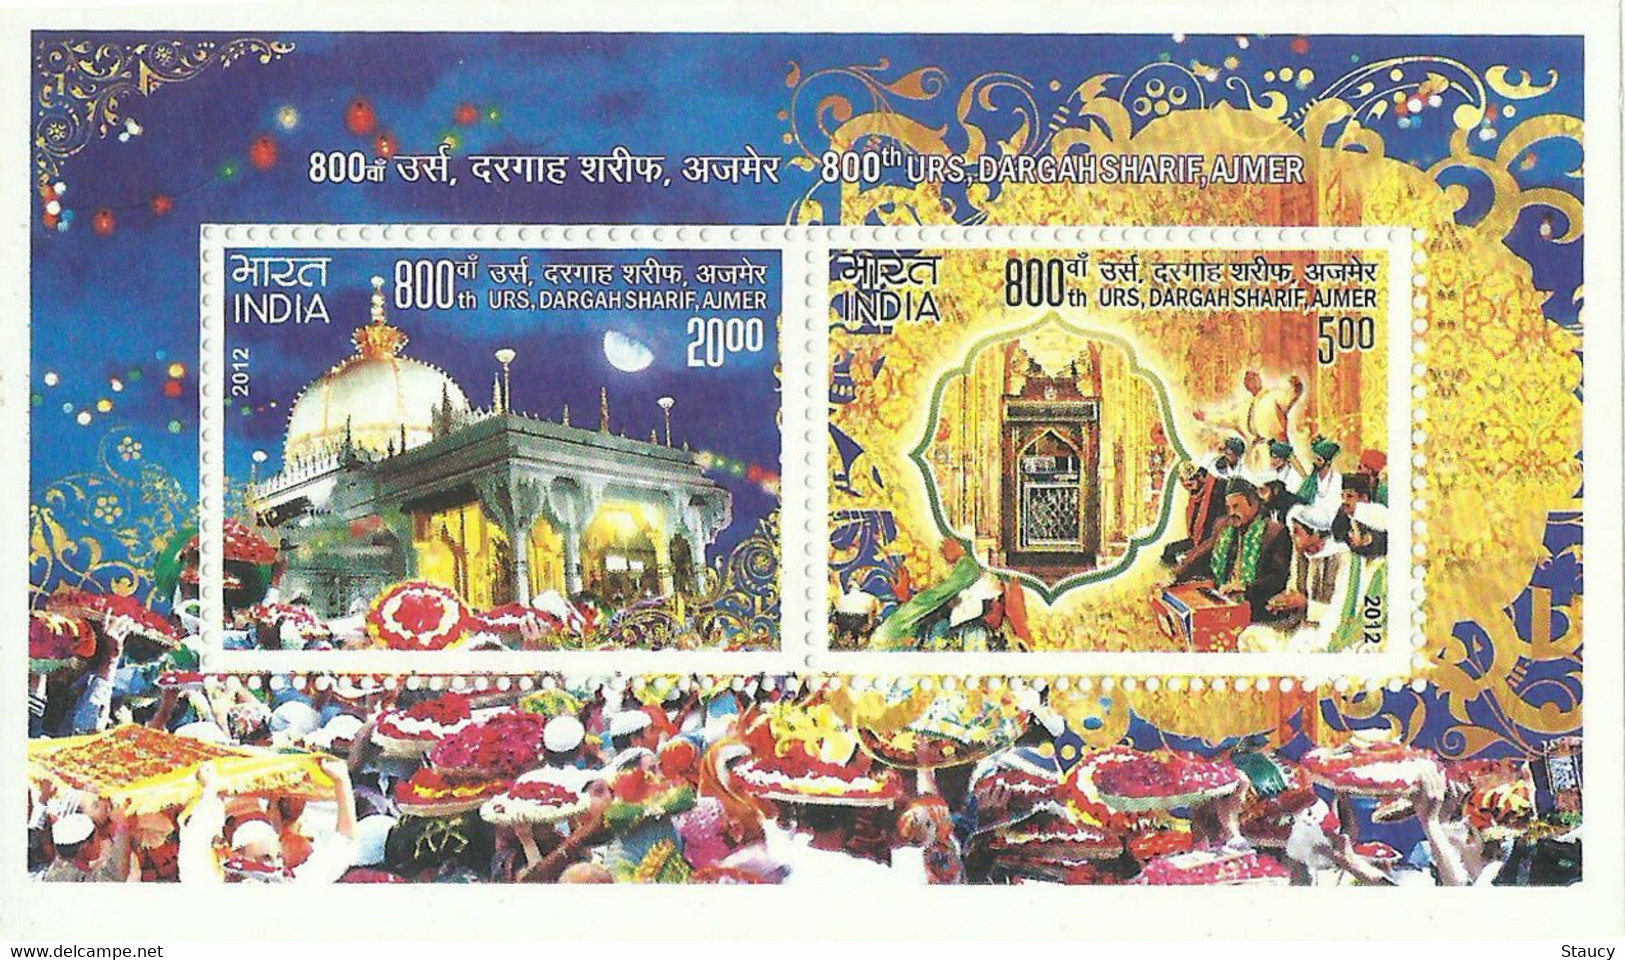 India 2012 Full set of Miniature sheets 6v Lighthouse Olympics Aviation Dargah MS MNH as per scan